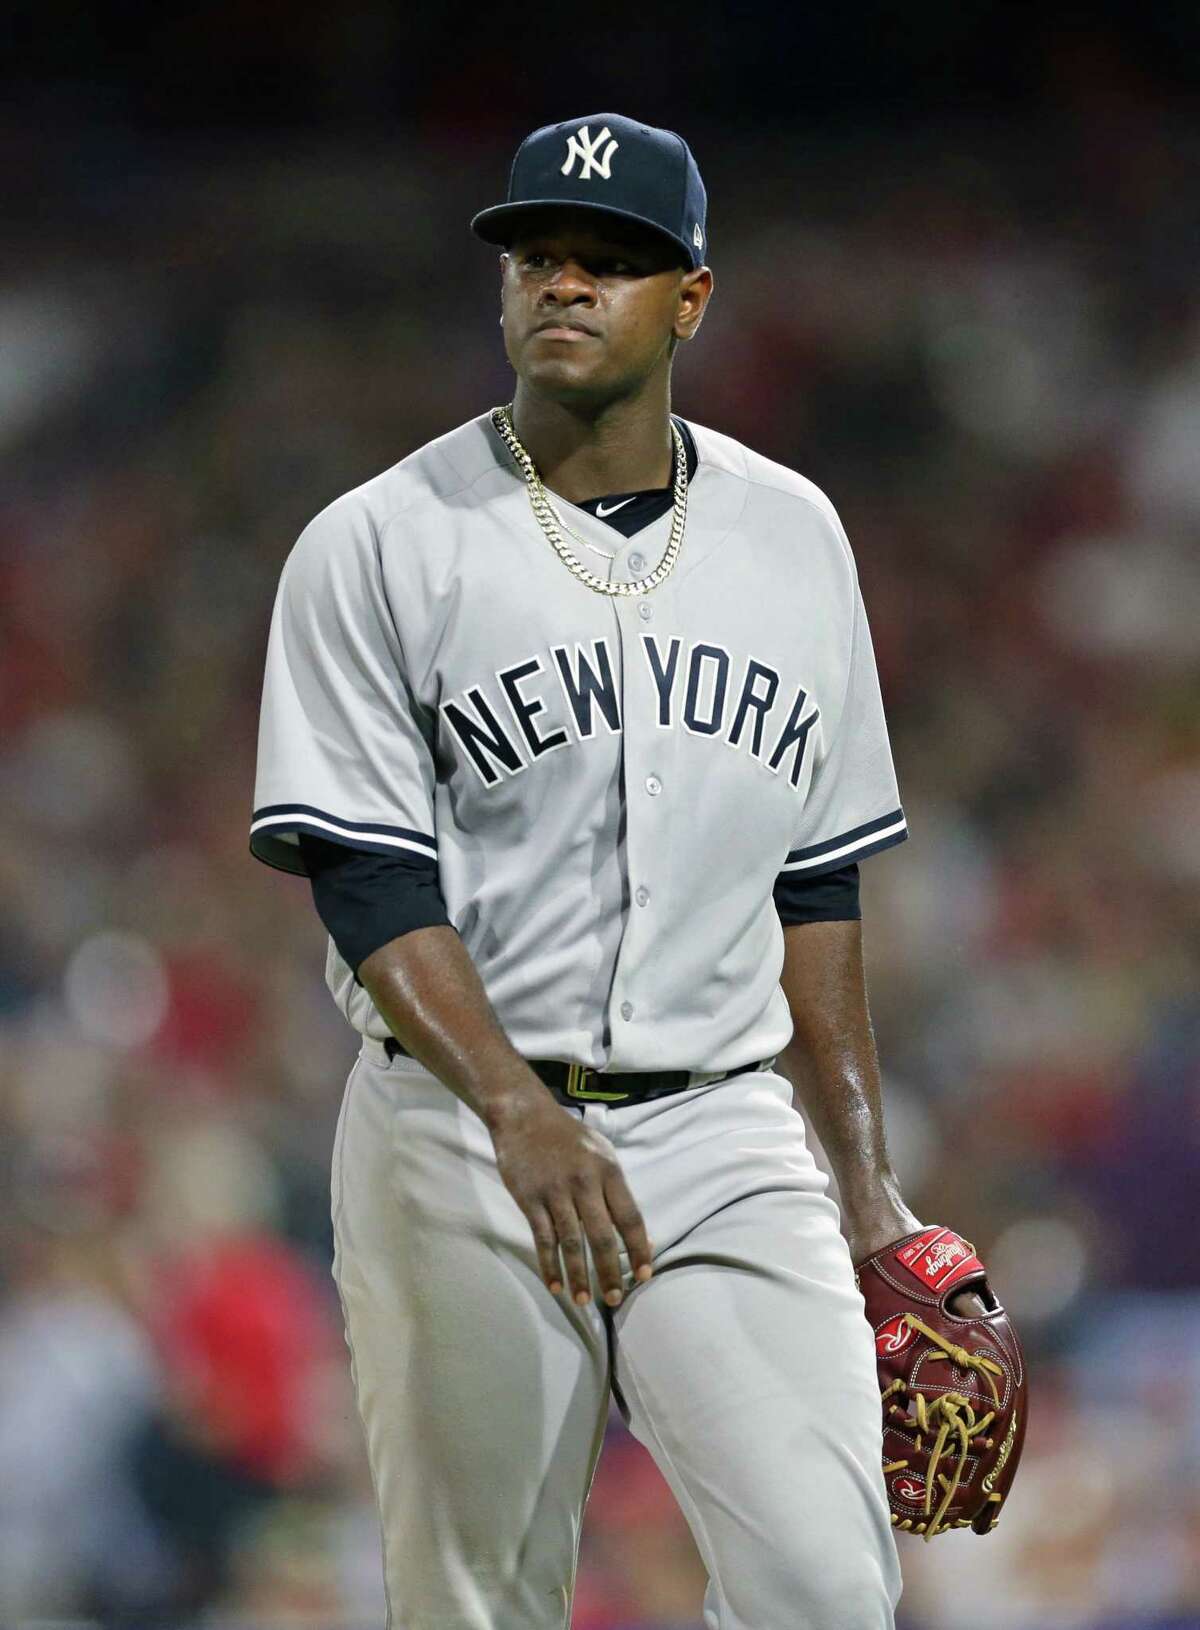 Yanks give Severino $40M contract